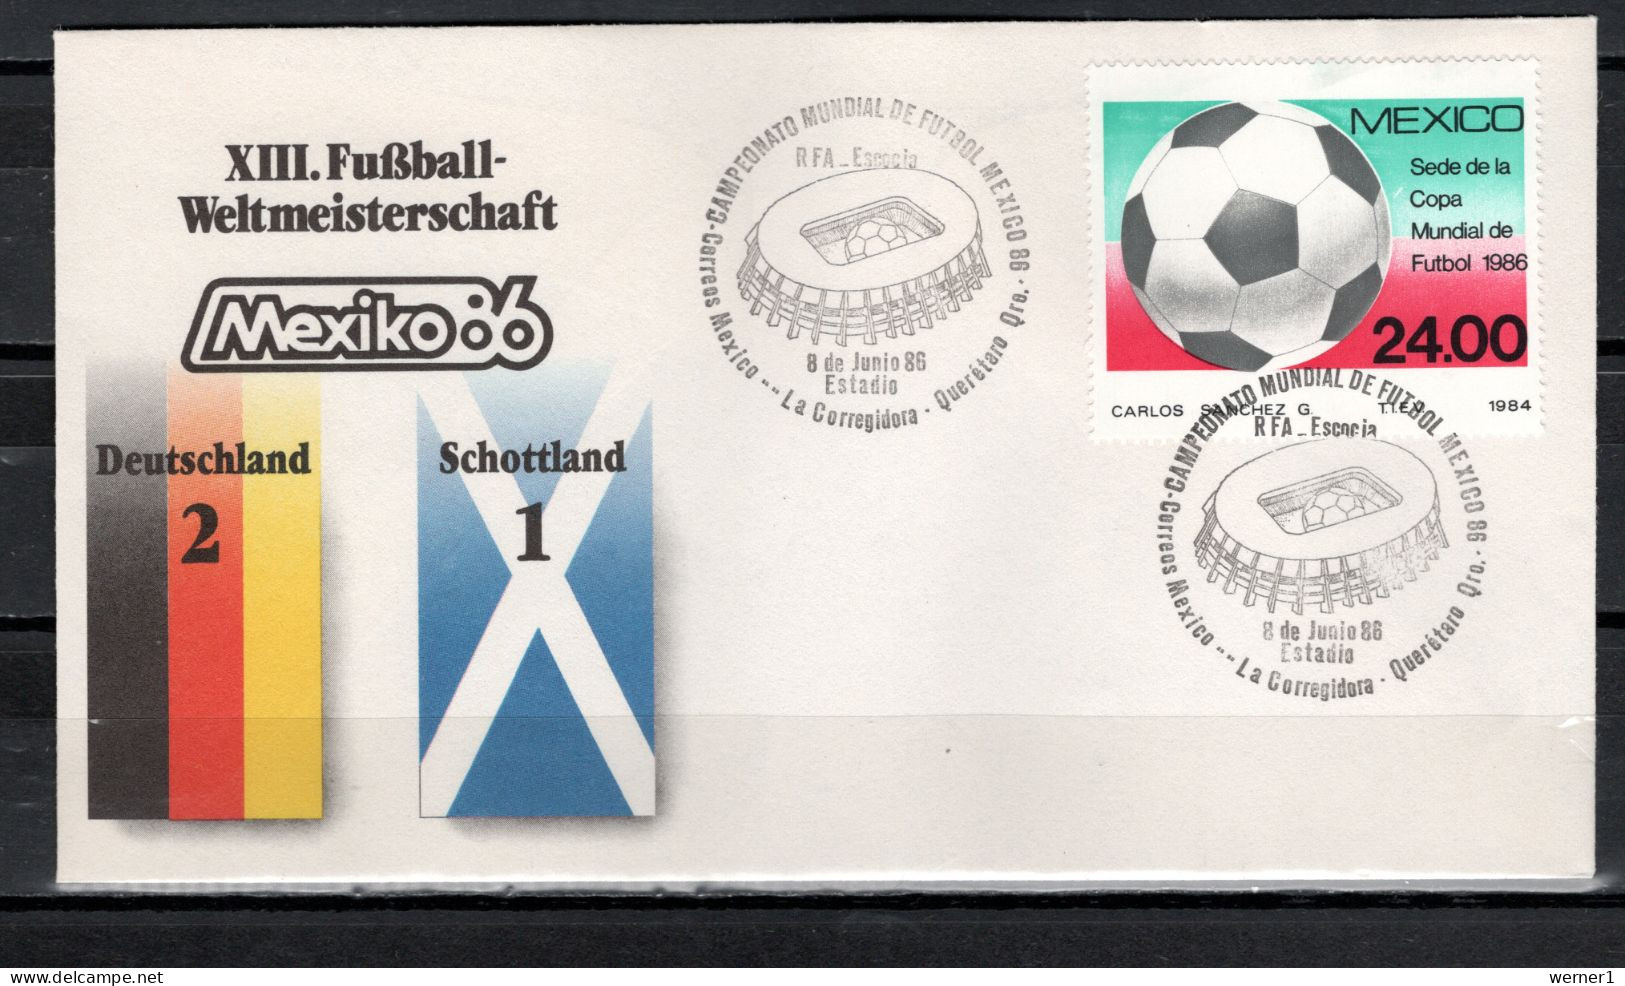 Mexico 1986 Football Soccer World Cup Commemorative Cover Match Germany - Scotland 2 : 1 - 1986 – Mexiko